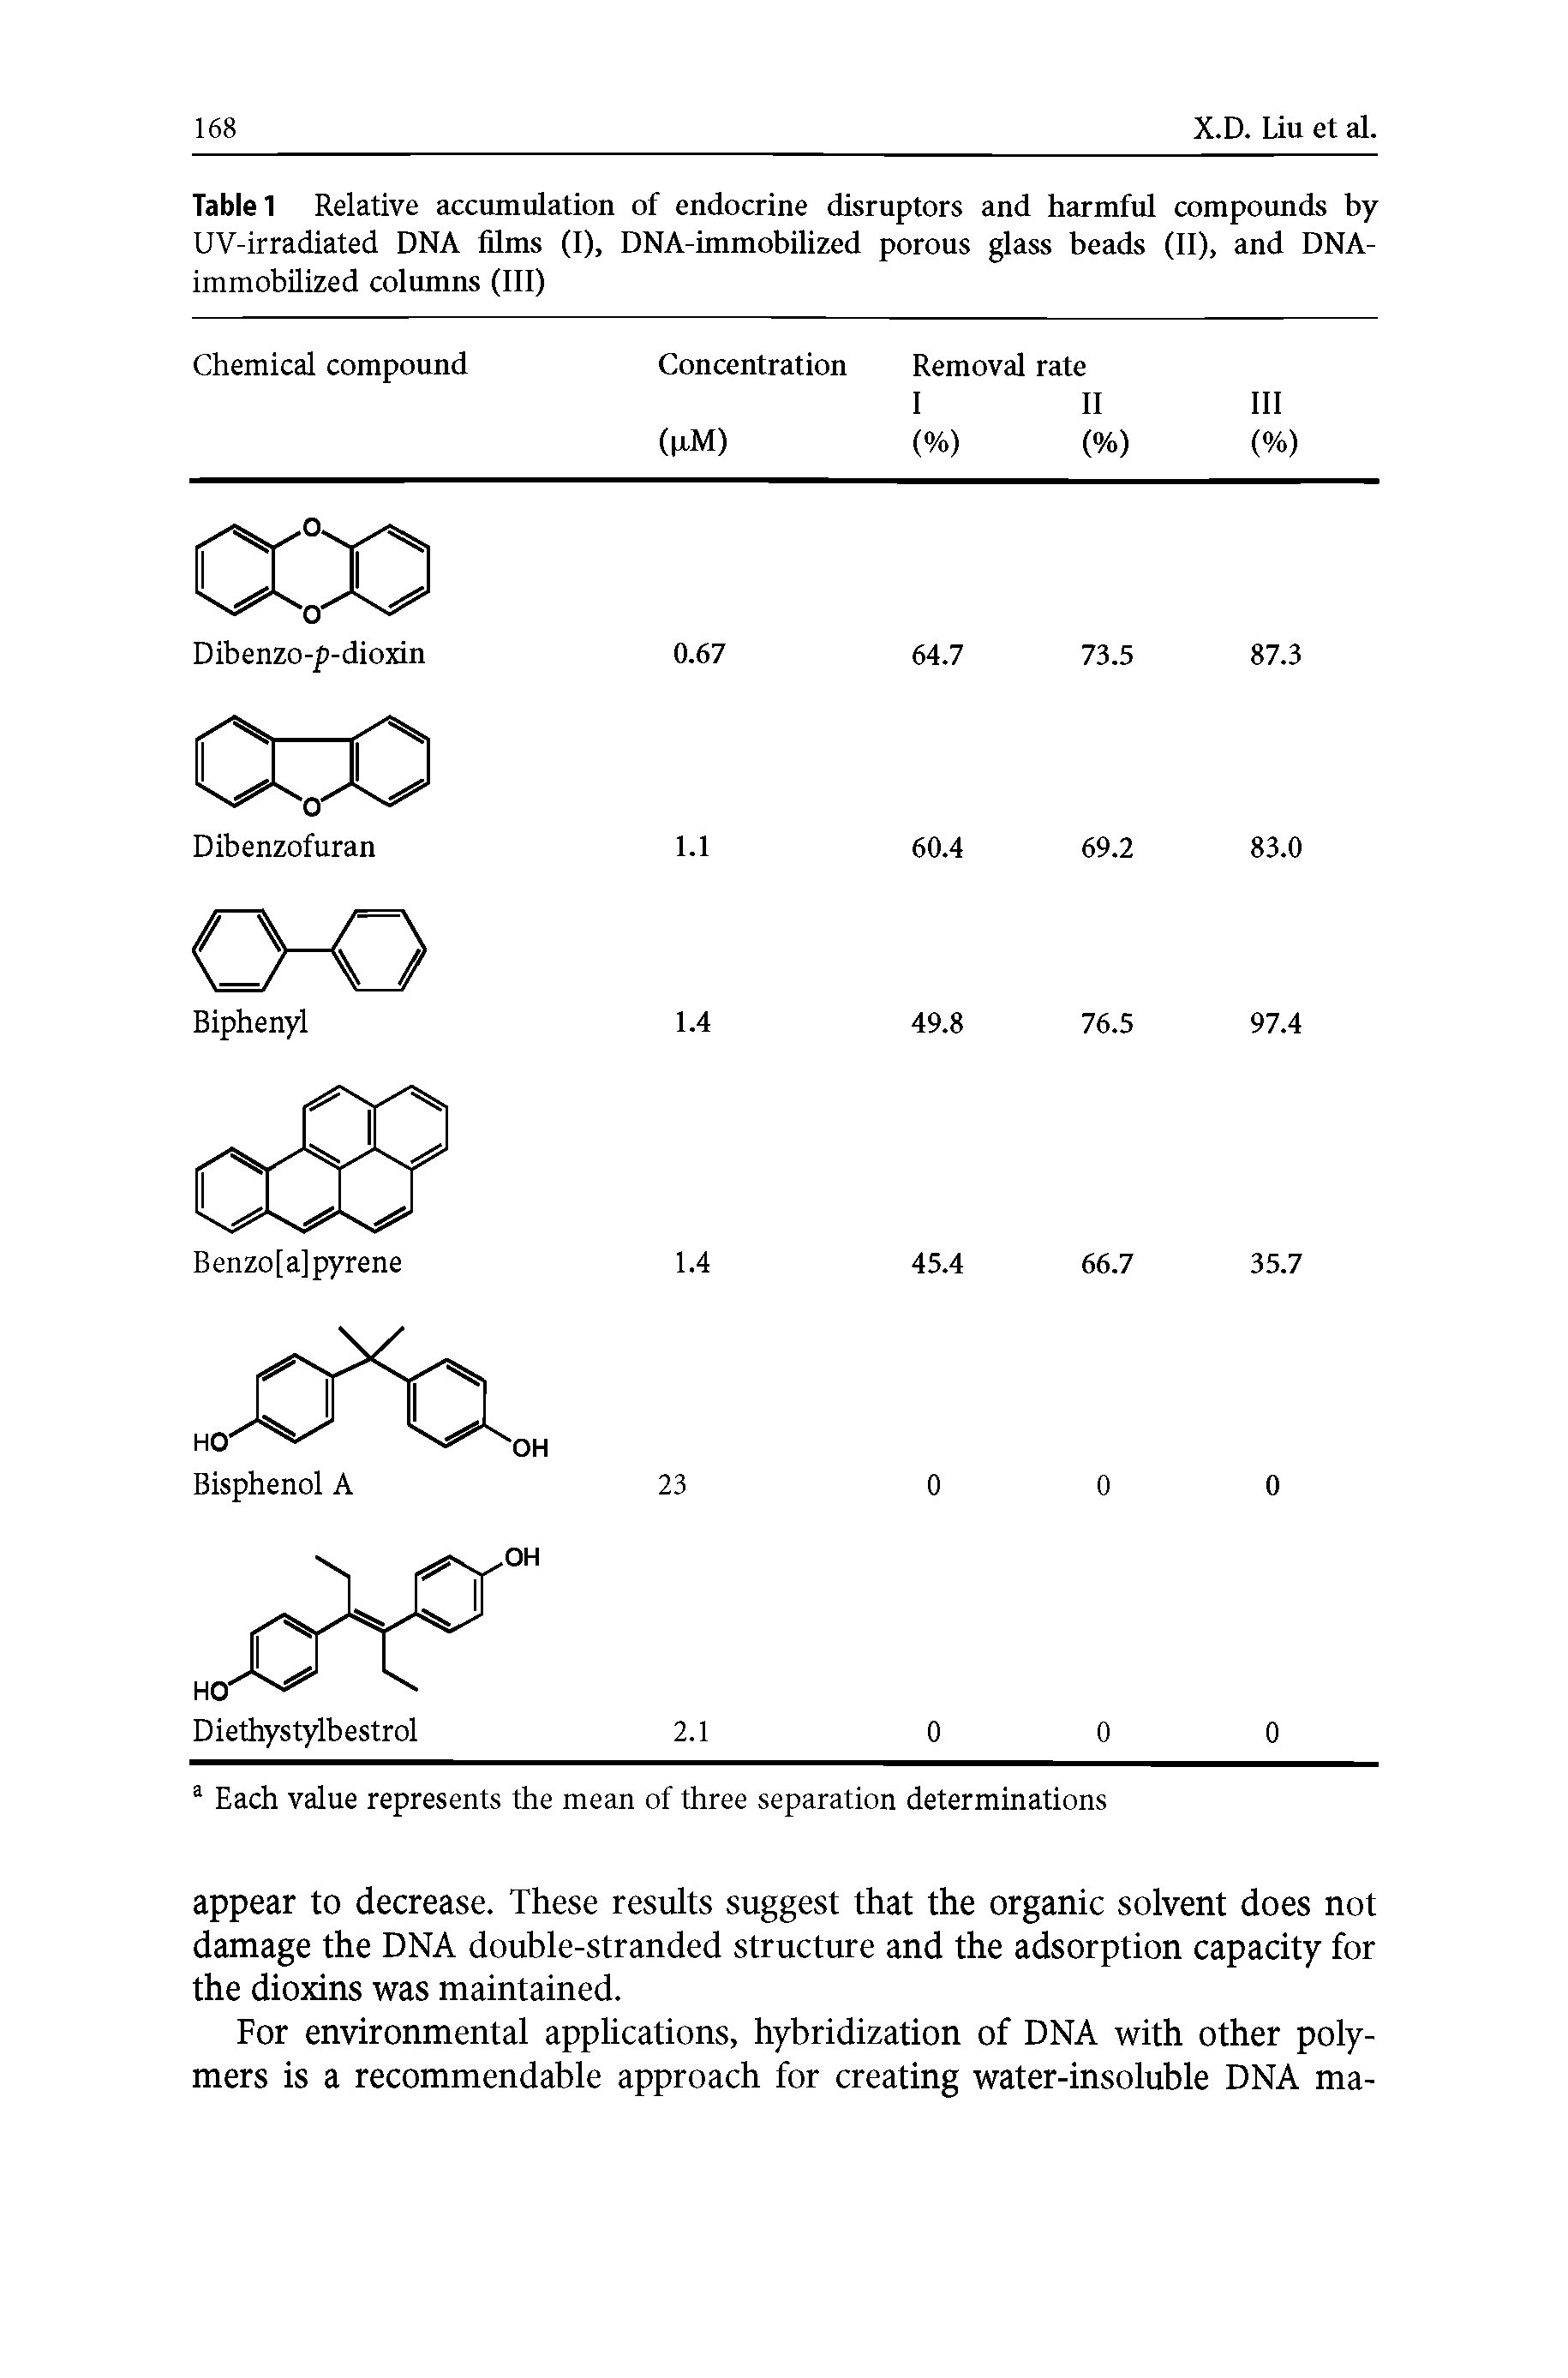 Table 1 Relative accumulation of endocrine disruptors and harmful compounds by UV-irradiated DNA films (I), DNA-immobilized porous glass beads (II), and DNA-...